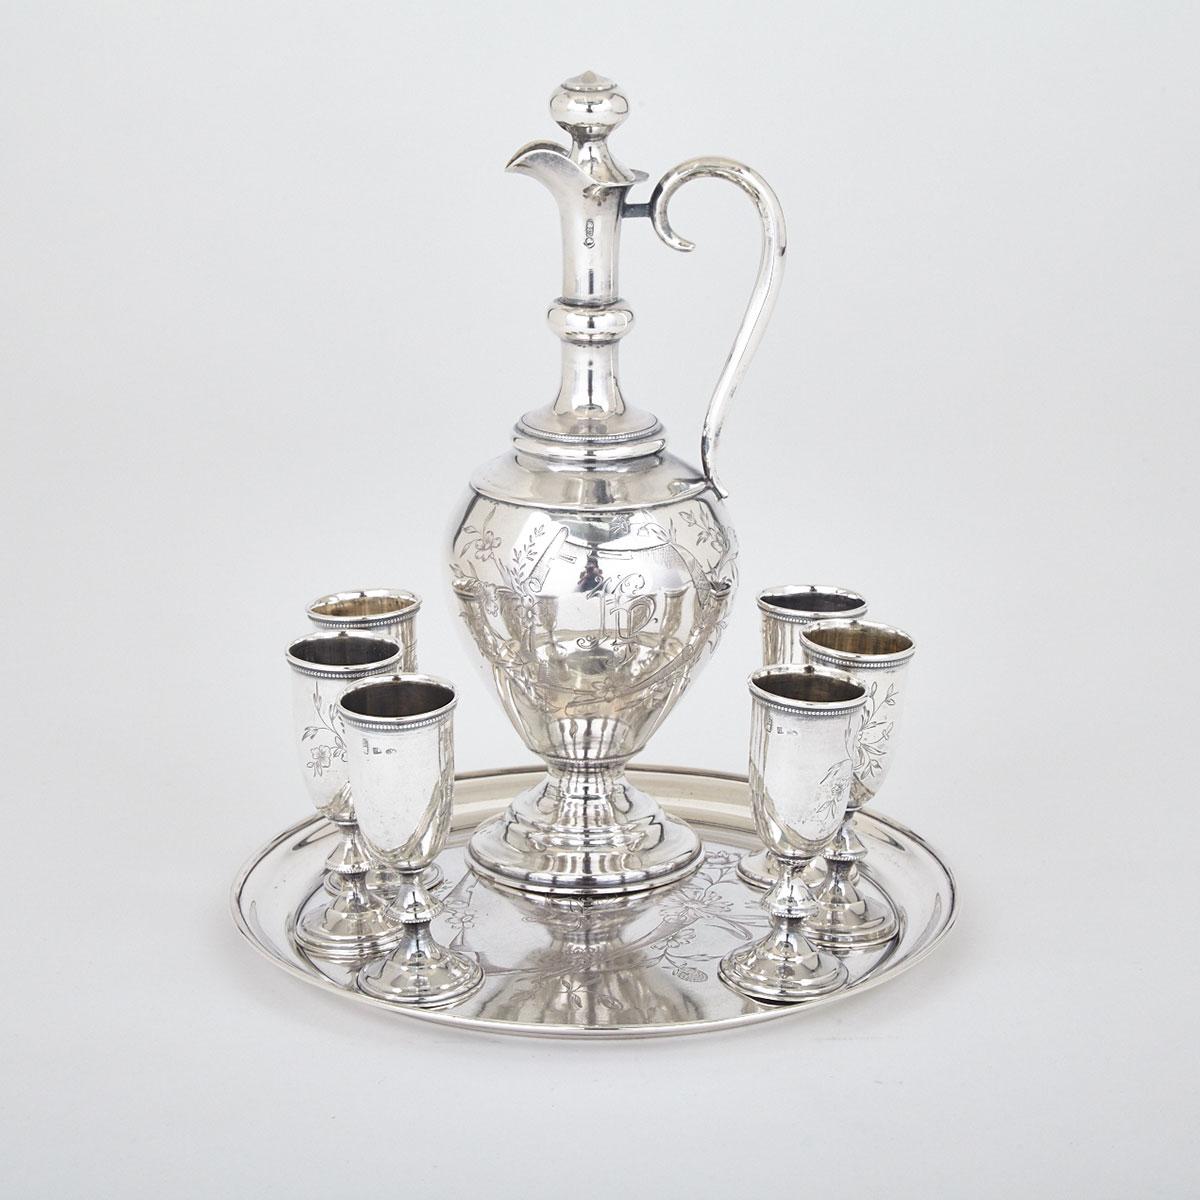 Latvian Silver Decanter with Six Goblets and Tray, early 20th century